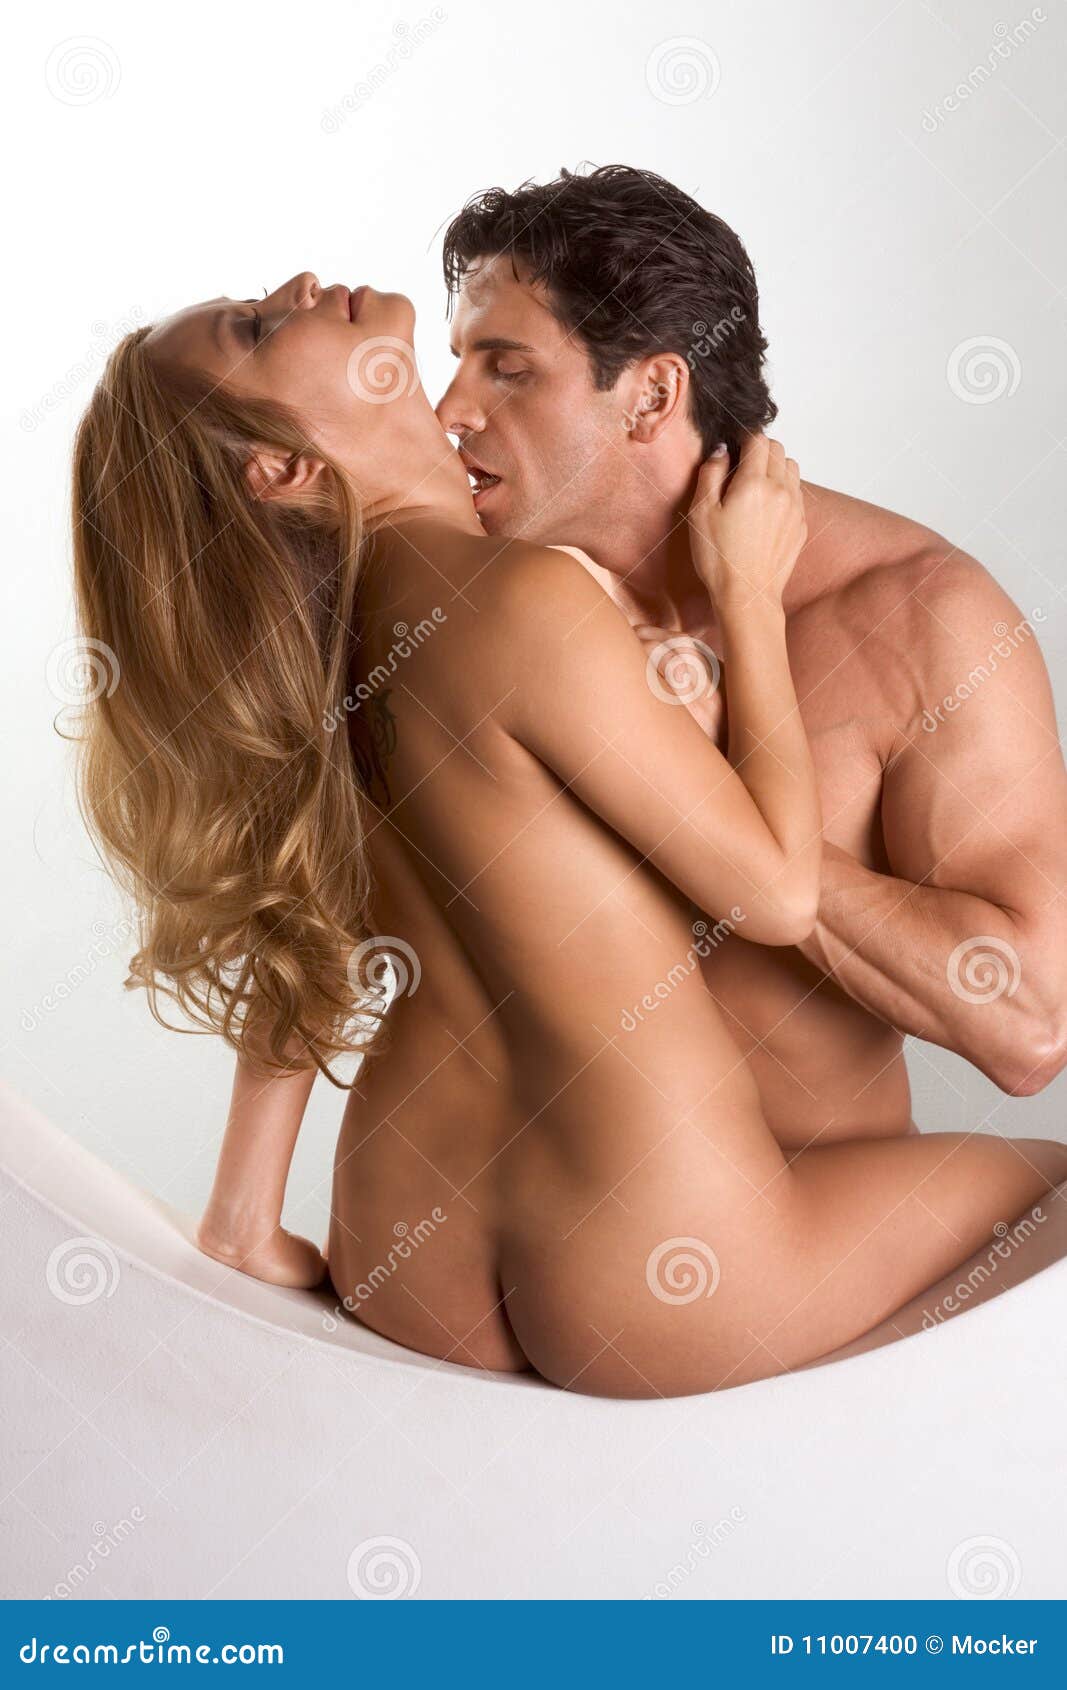 Naked Interracial Couple Kiss in Sexual Games Stock Photo picture